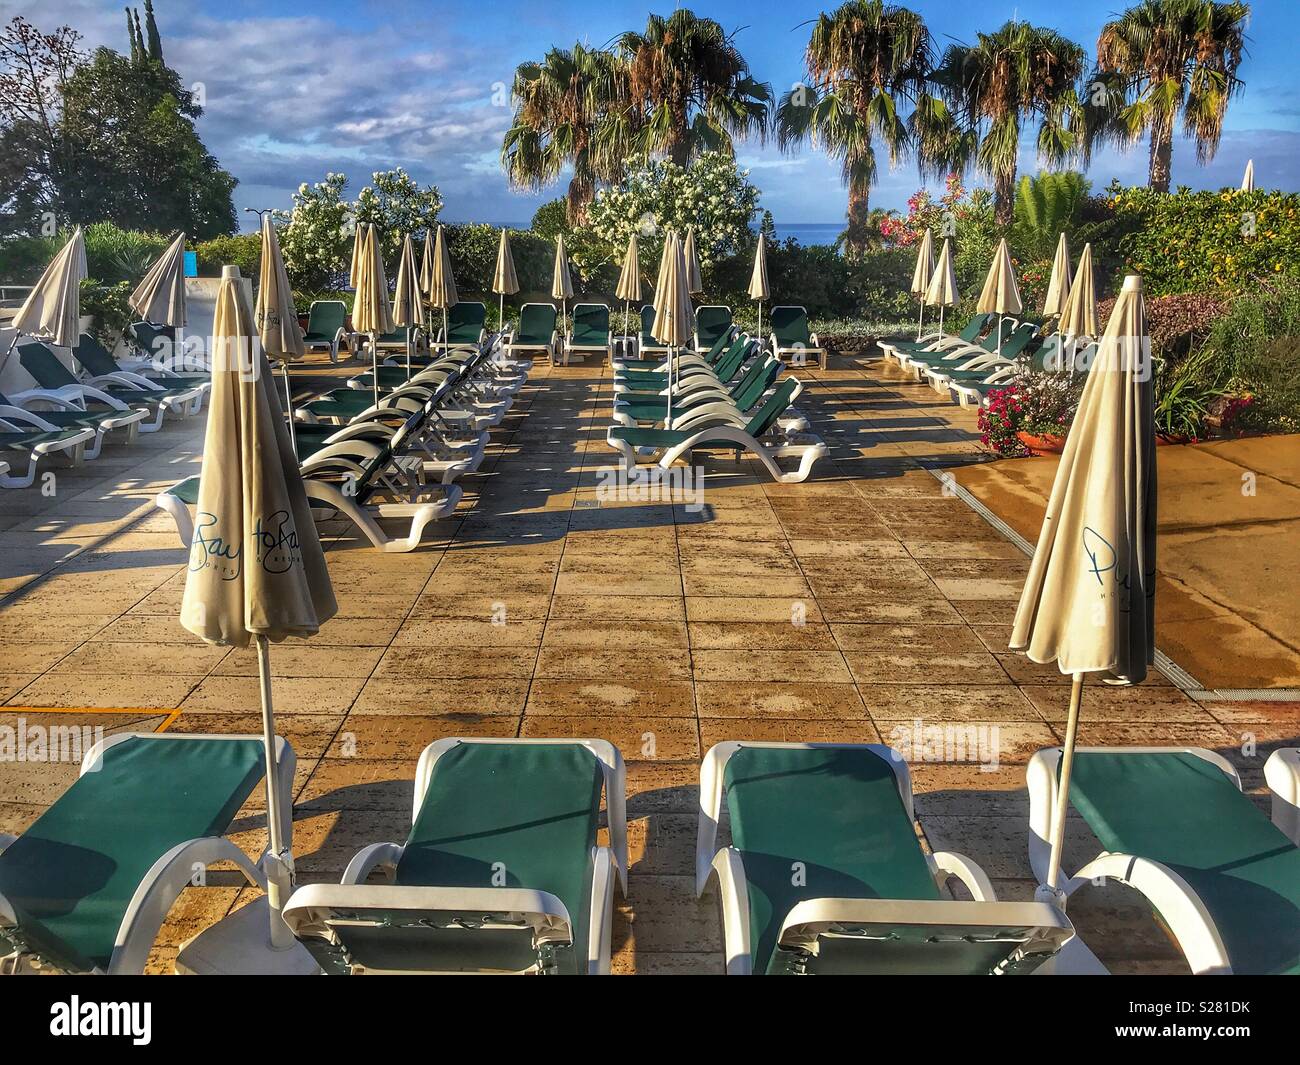 Rows of empty sun loungers with sun shades down, early morning in the gardens of a resort hotel, Funchal, Madeira, Portugal Stock Photo